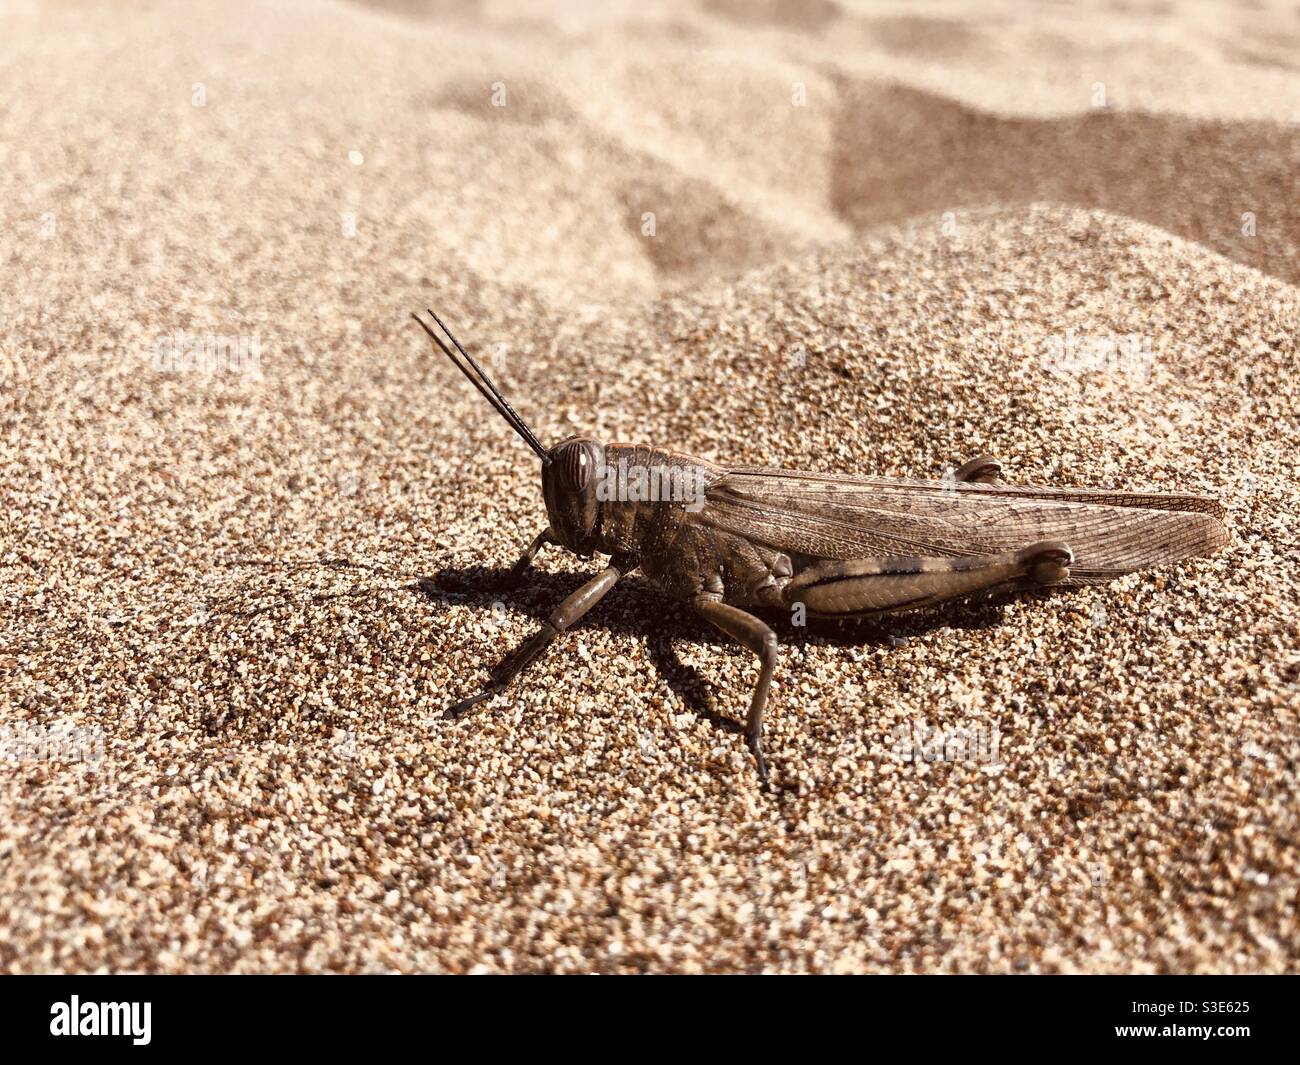 Close up shot of a grasshopper on sand Stock Photo